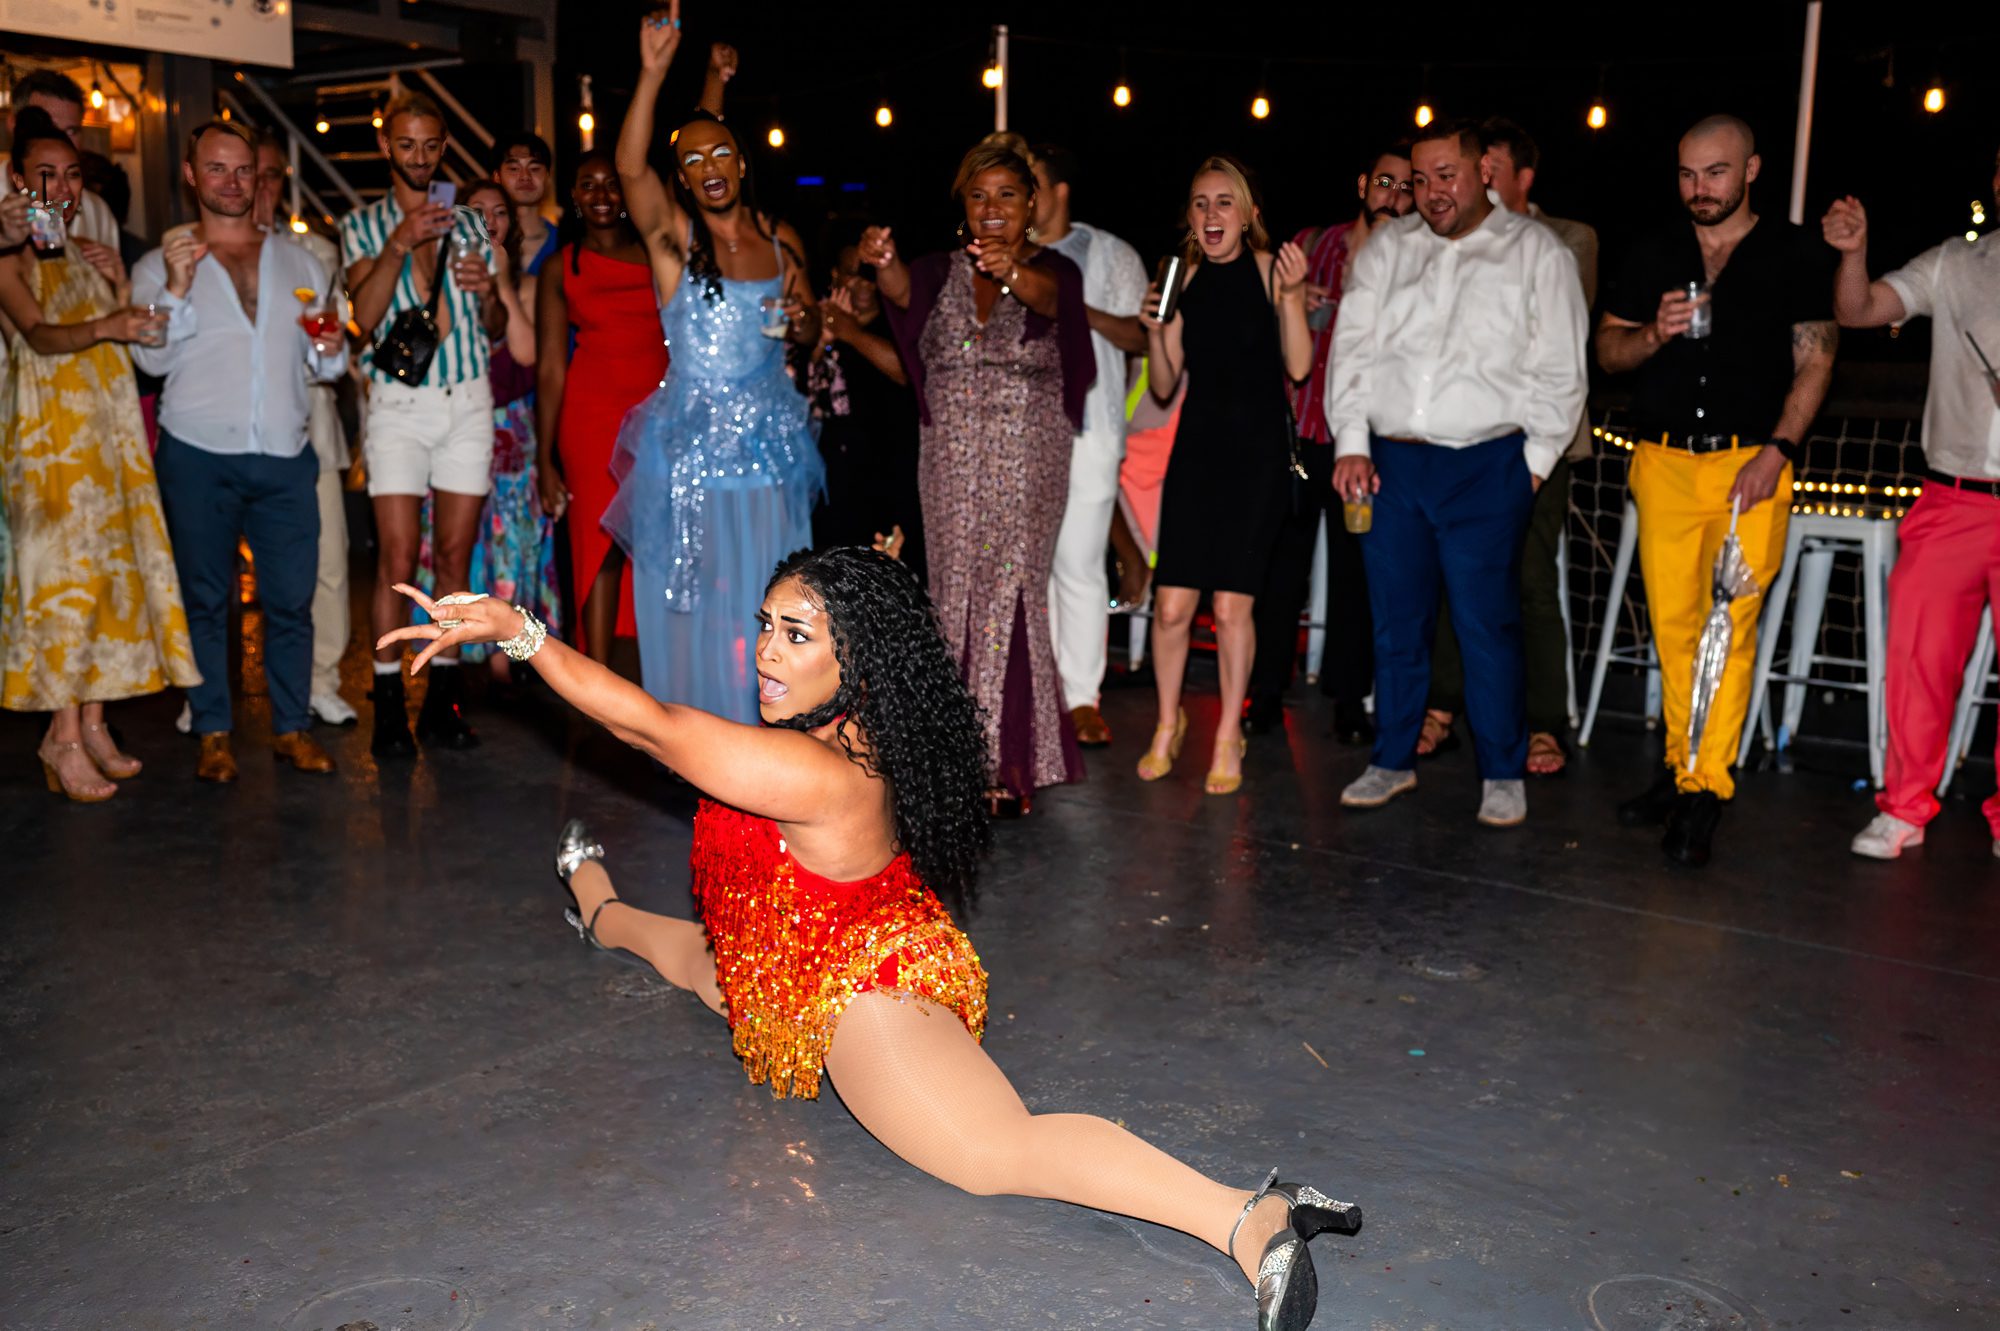 A drag queen doing the splits at a wedding in NYC 